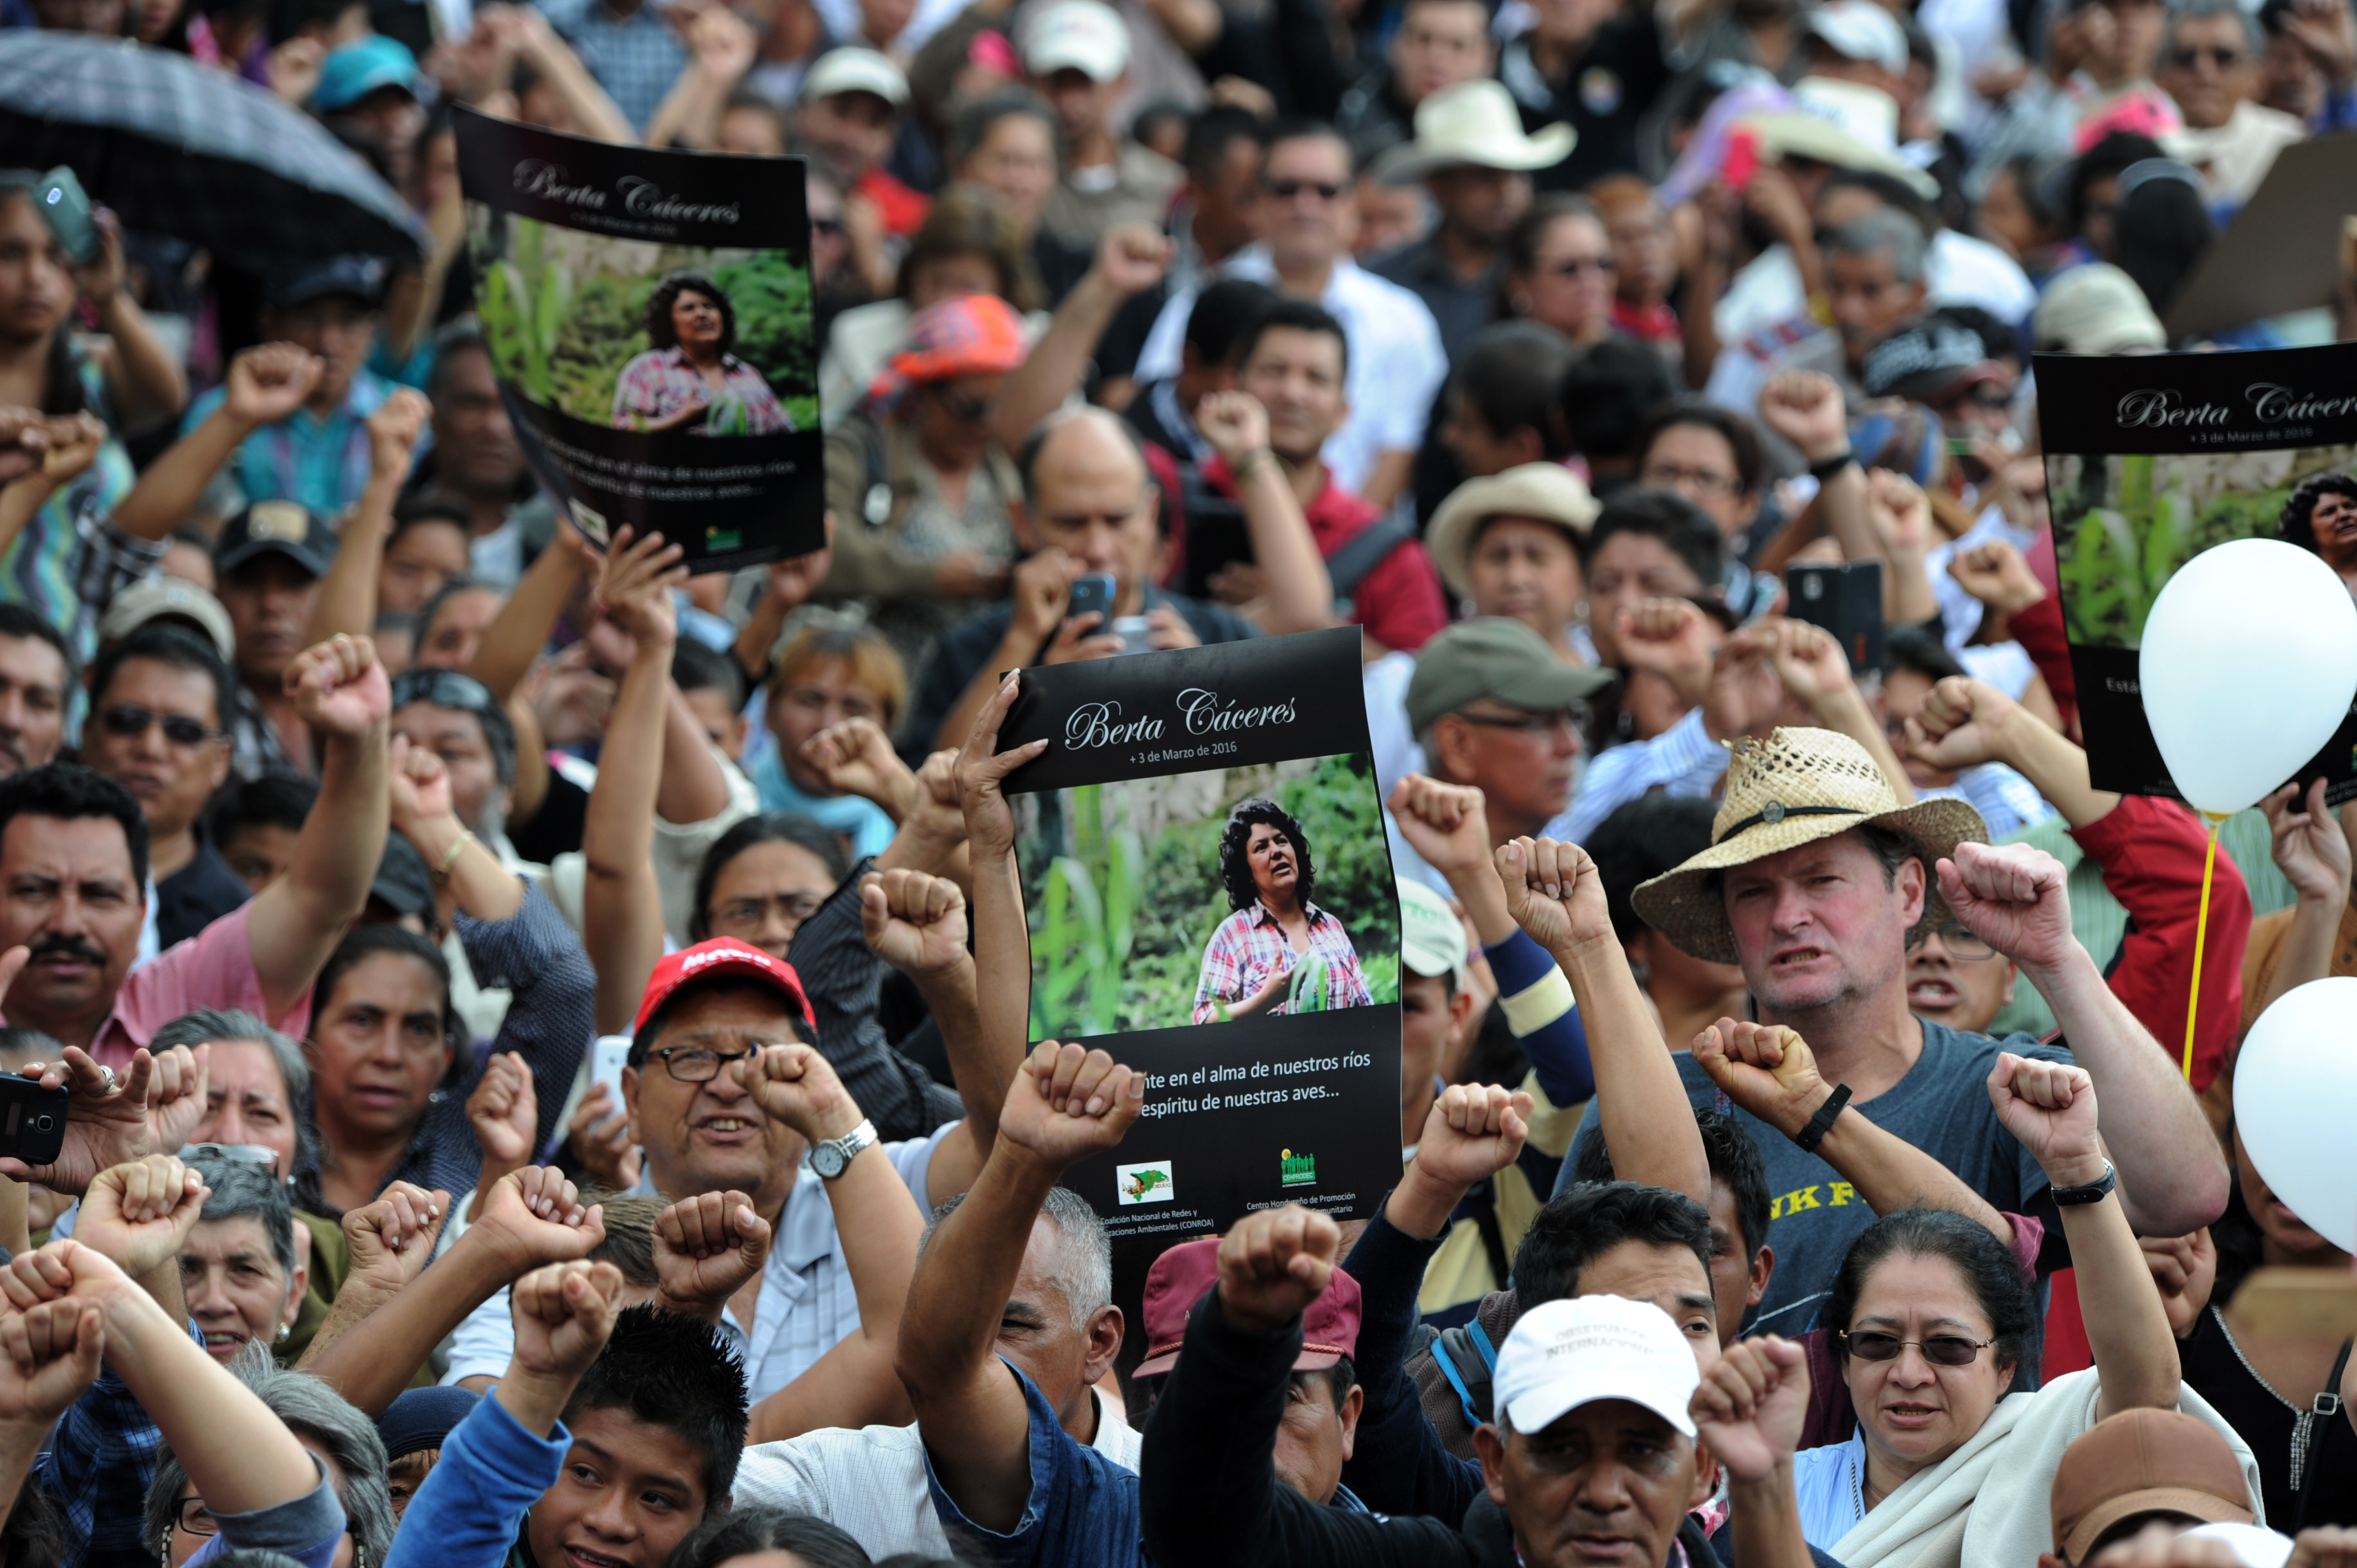 People attend the funeral of murdered indigenous activist Berta Caceres, in La Esperanza, 200 km northwest of Tegucigalpa, on March 5, 2016. Honduran indigenous activist Berta Caceres, a renowned environmentalist whose family has labeled her killing an assassination, was shot dead on March 3 at her home in La Esperanza. Caceres rose to prominence for leading the indigenous Lenca people in a struggle against a hydroelectric dam project that would have flooded large areas of native lands and cut off water supplies to hundreds.  AFP PHOTO / ORLANDO SIERRA / AFP / ORLANDO SIERRA        (Photo credit should read ORLANDO SIERRA/AFP/Getty Images)